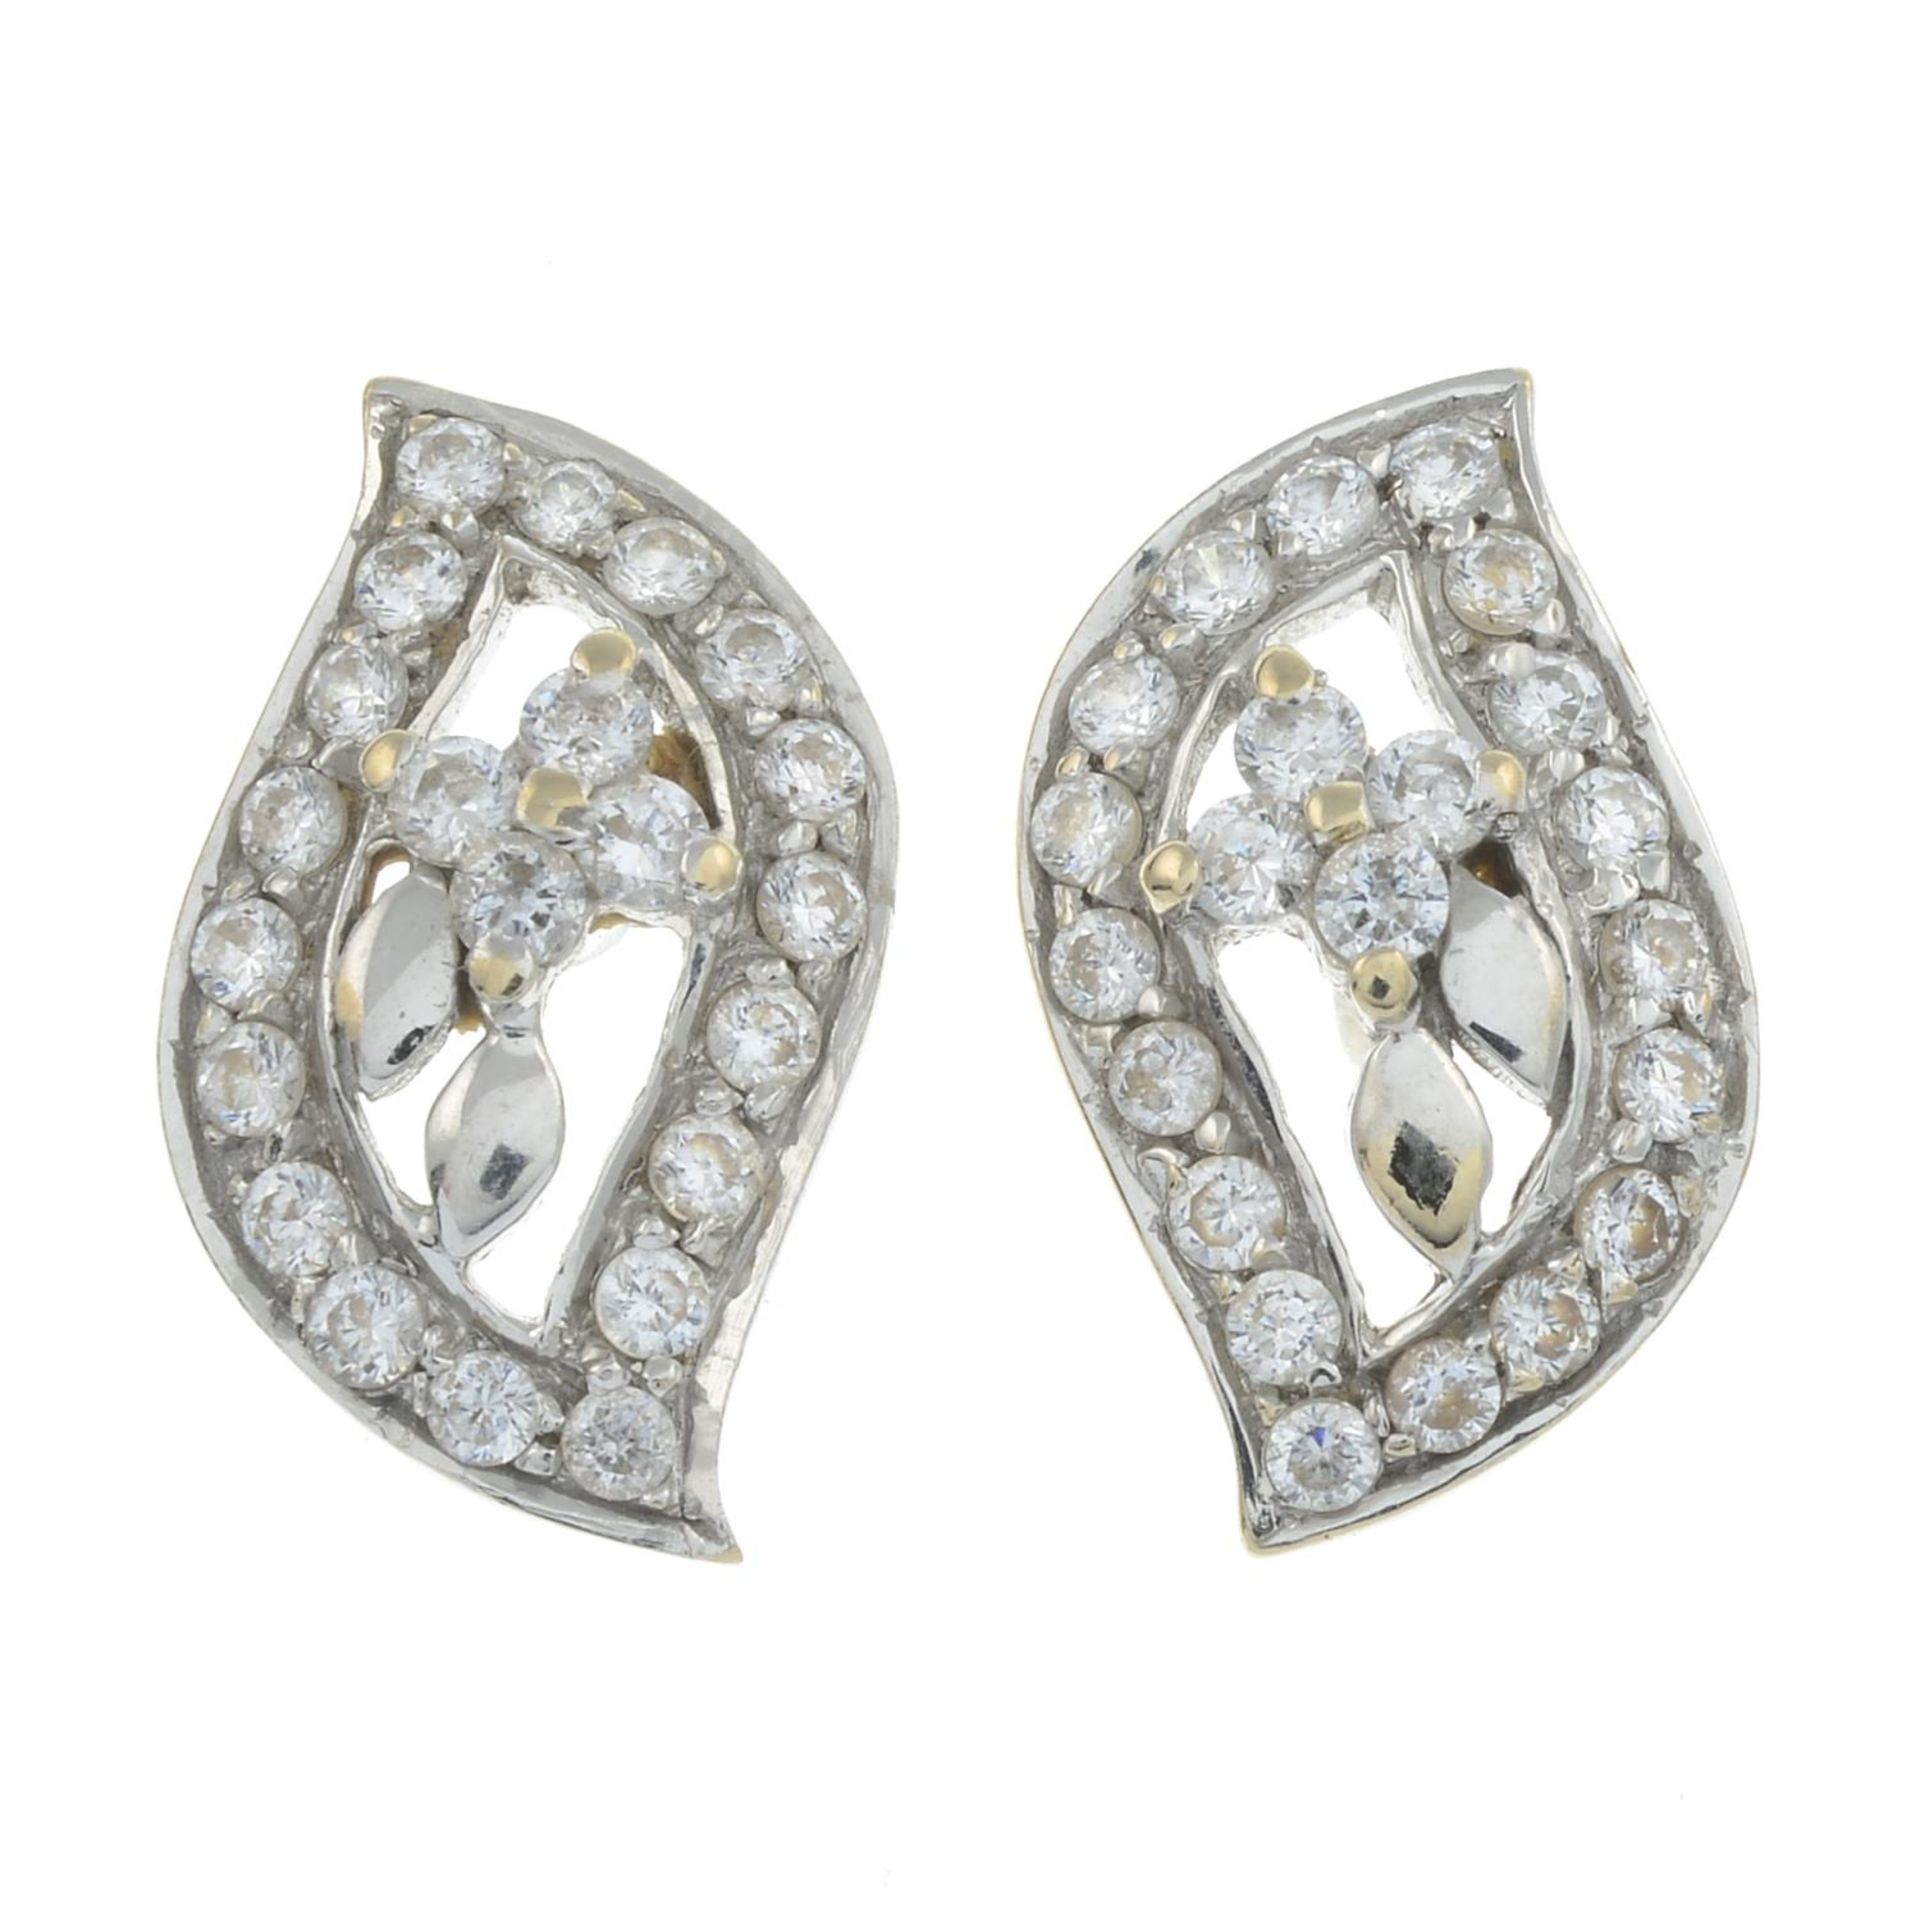 A pair of cubic zirconia floral earrings.